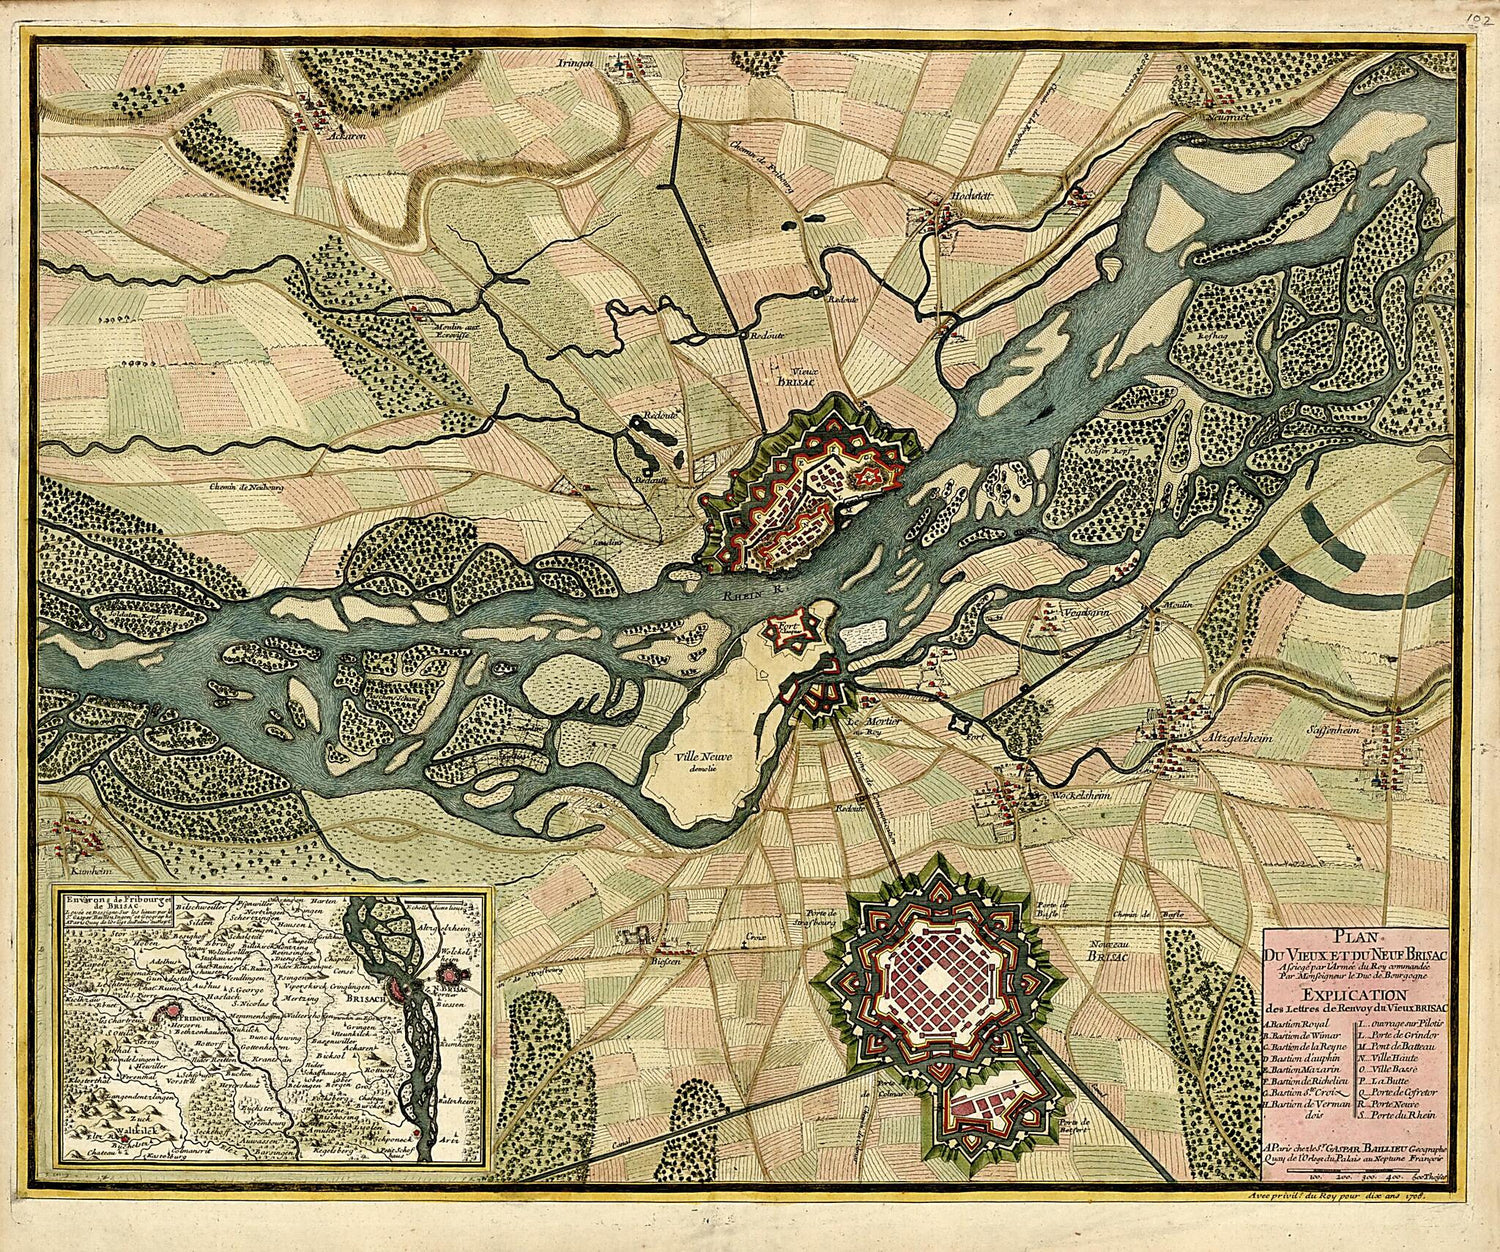 This old map of Plan Du Vieux Et Du Neuf Brisac from a Collection of Plans of Fortifications and Battles, 1684-from 1709 from 1709 was created by Anna Beeck in 1709